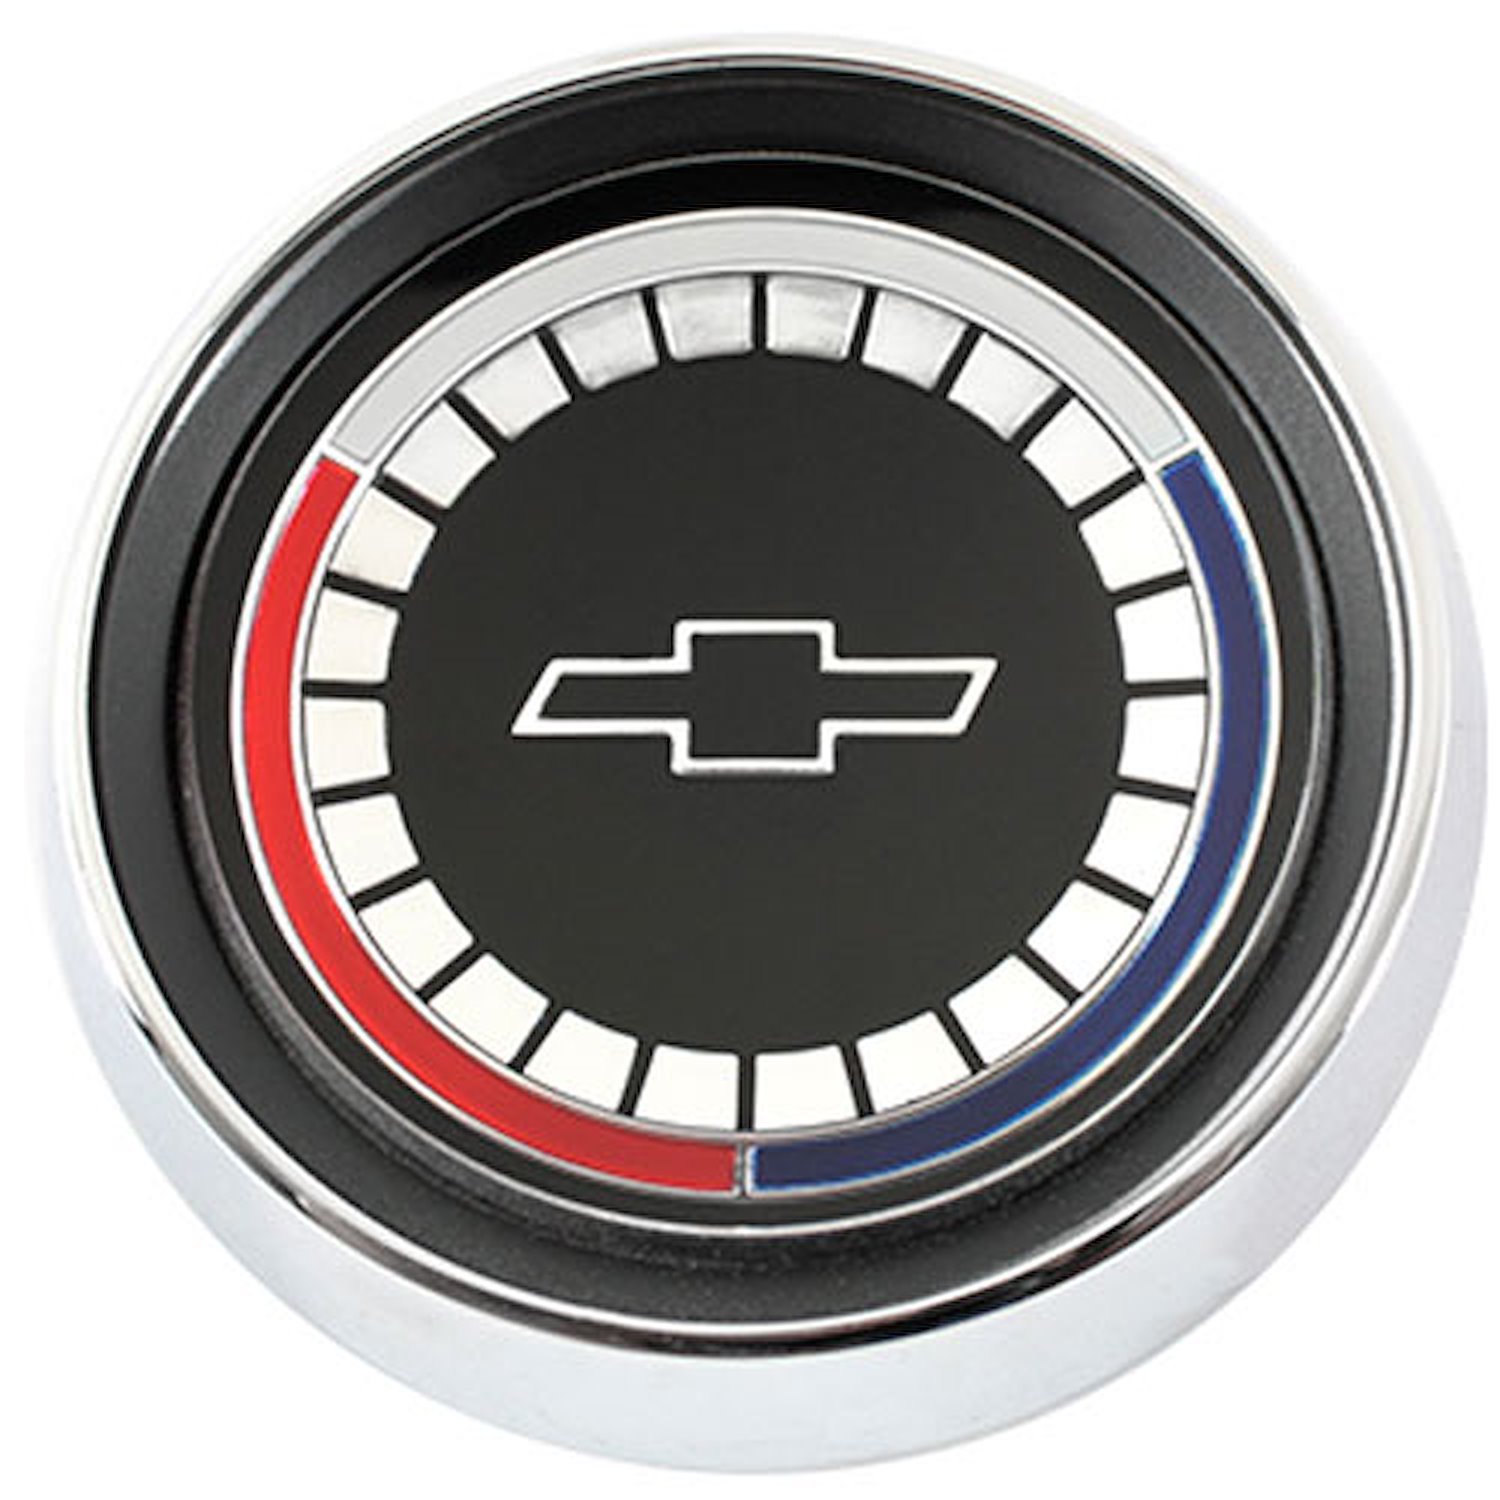 Horn Button Assembly for 1965 Chevrolet Impala, Bel Air, Biscayne Chevelle, Corvair, and El Camino